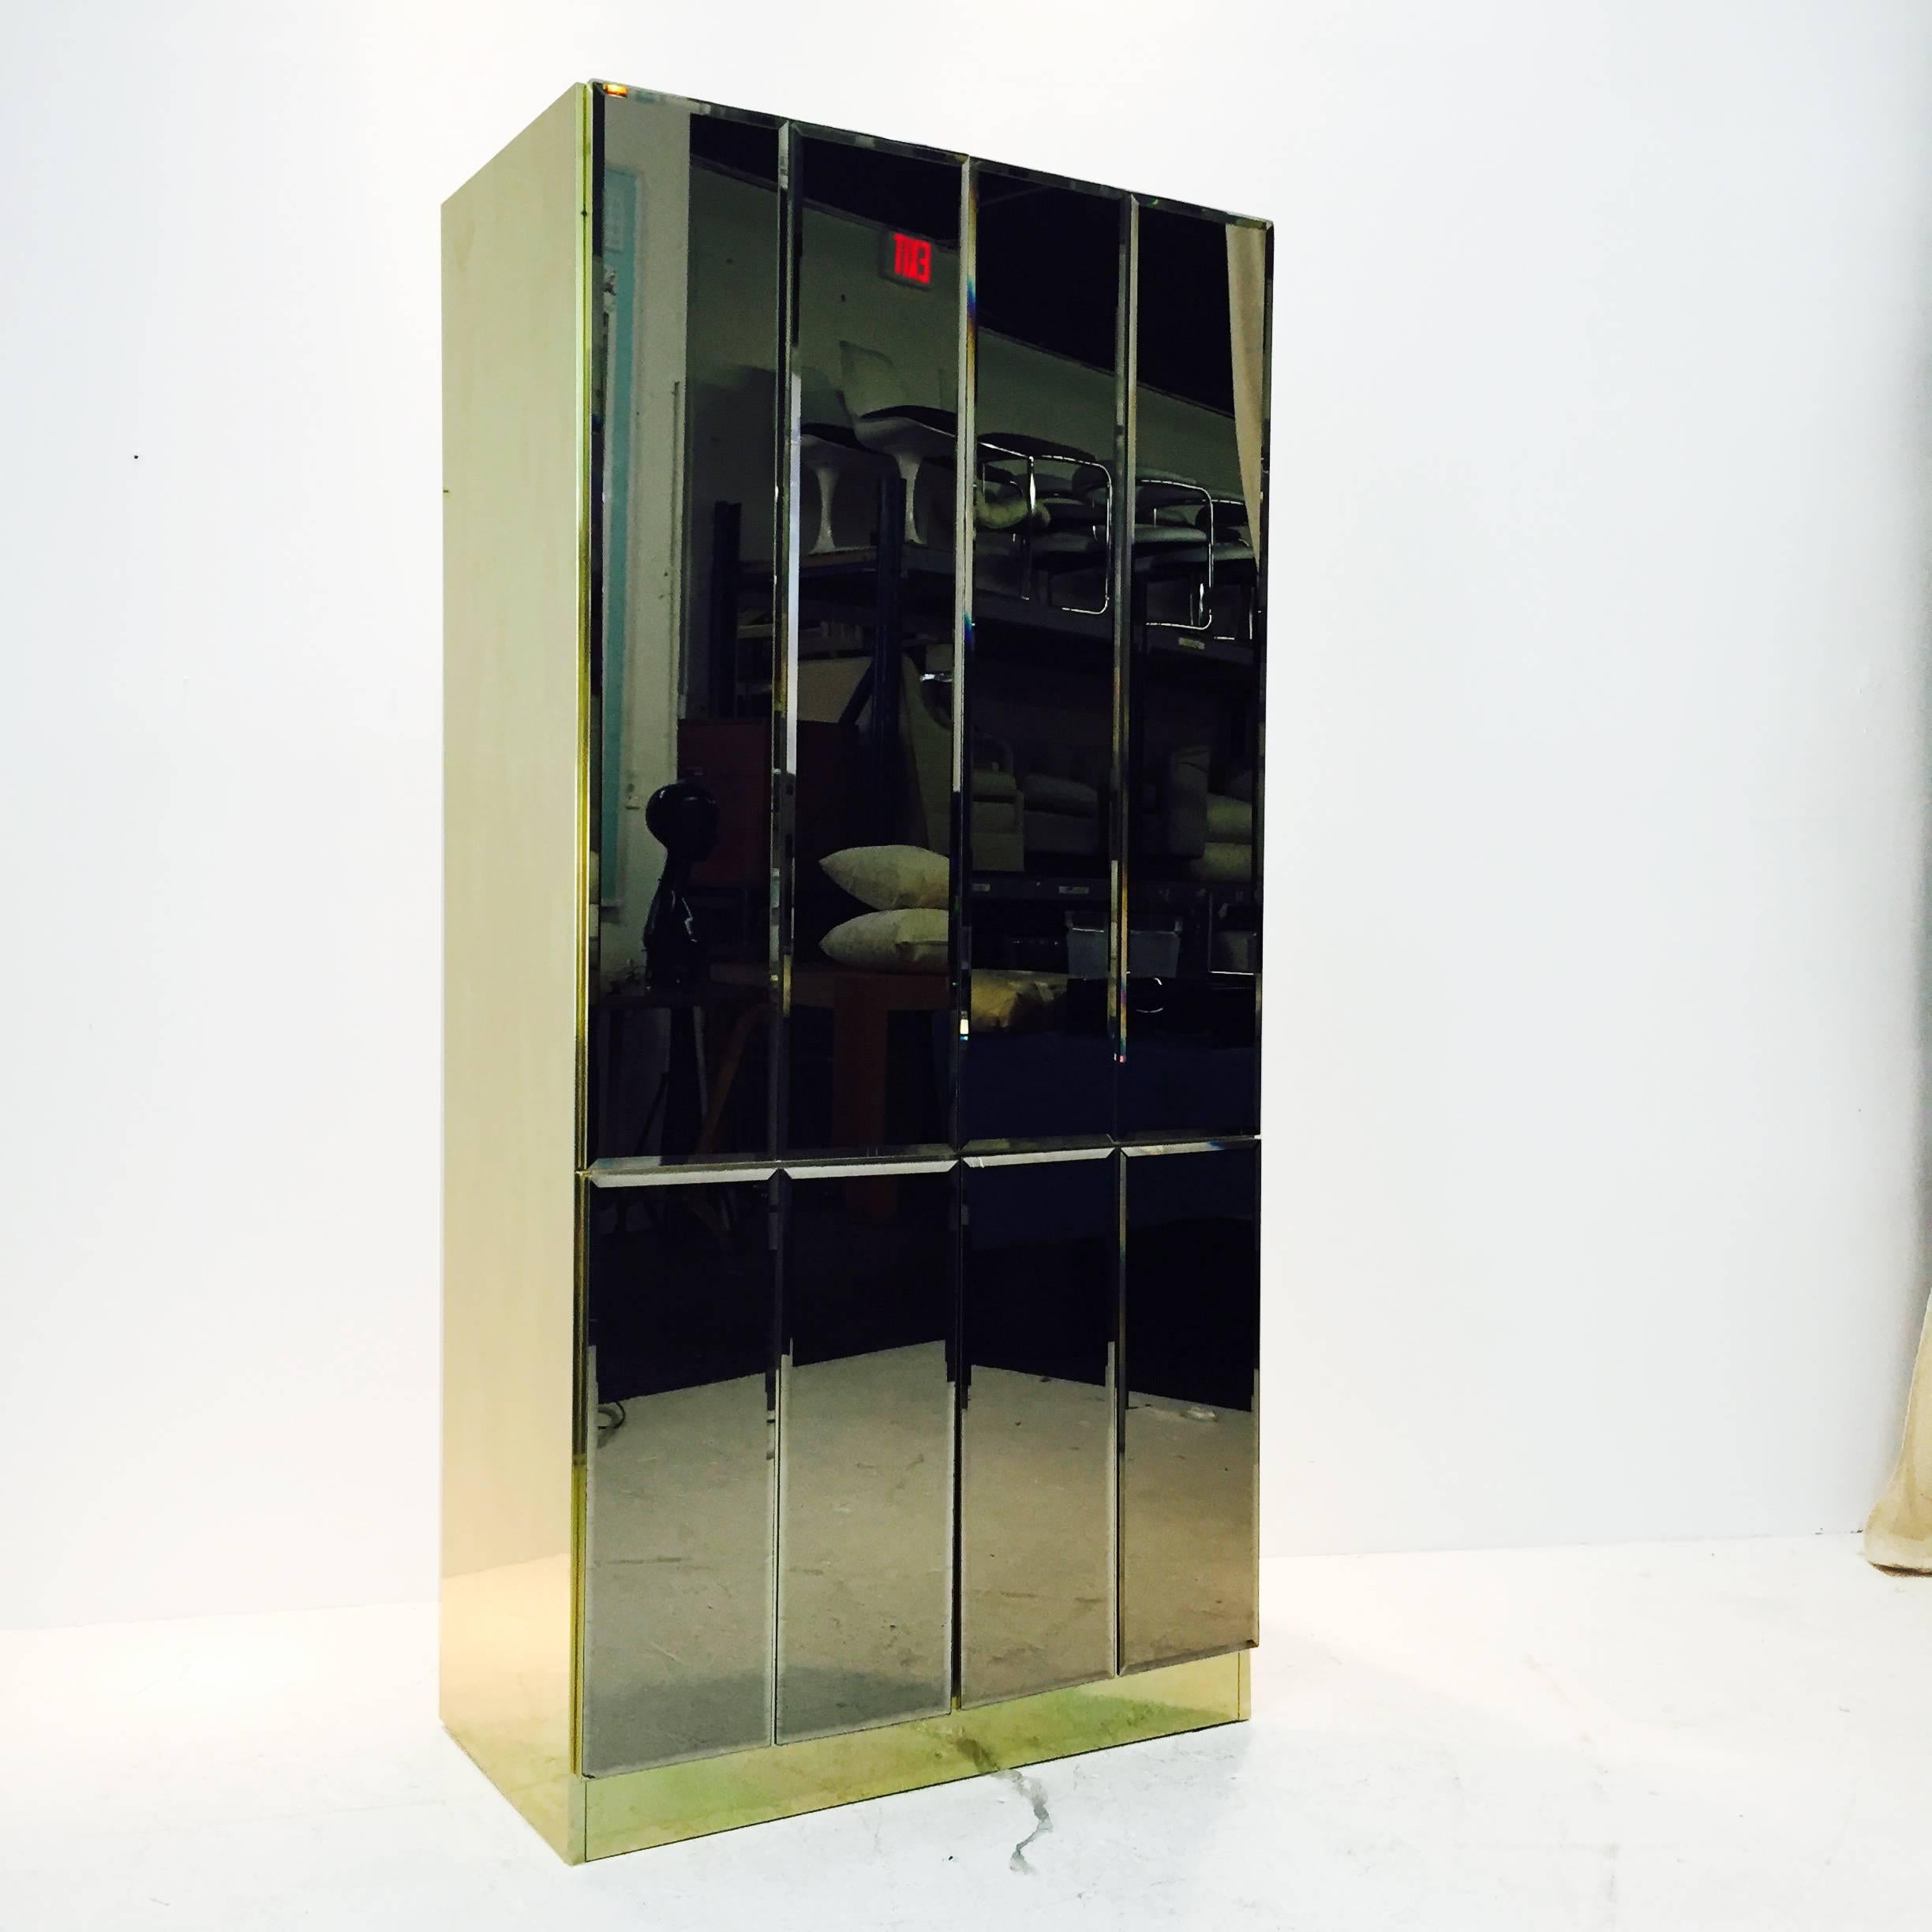 Tall bronzed mirror and brass cabinet by Ello.

dimensions: 36.5